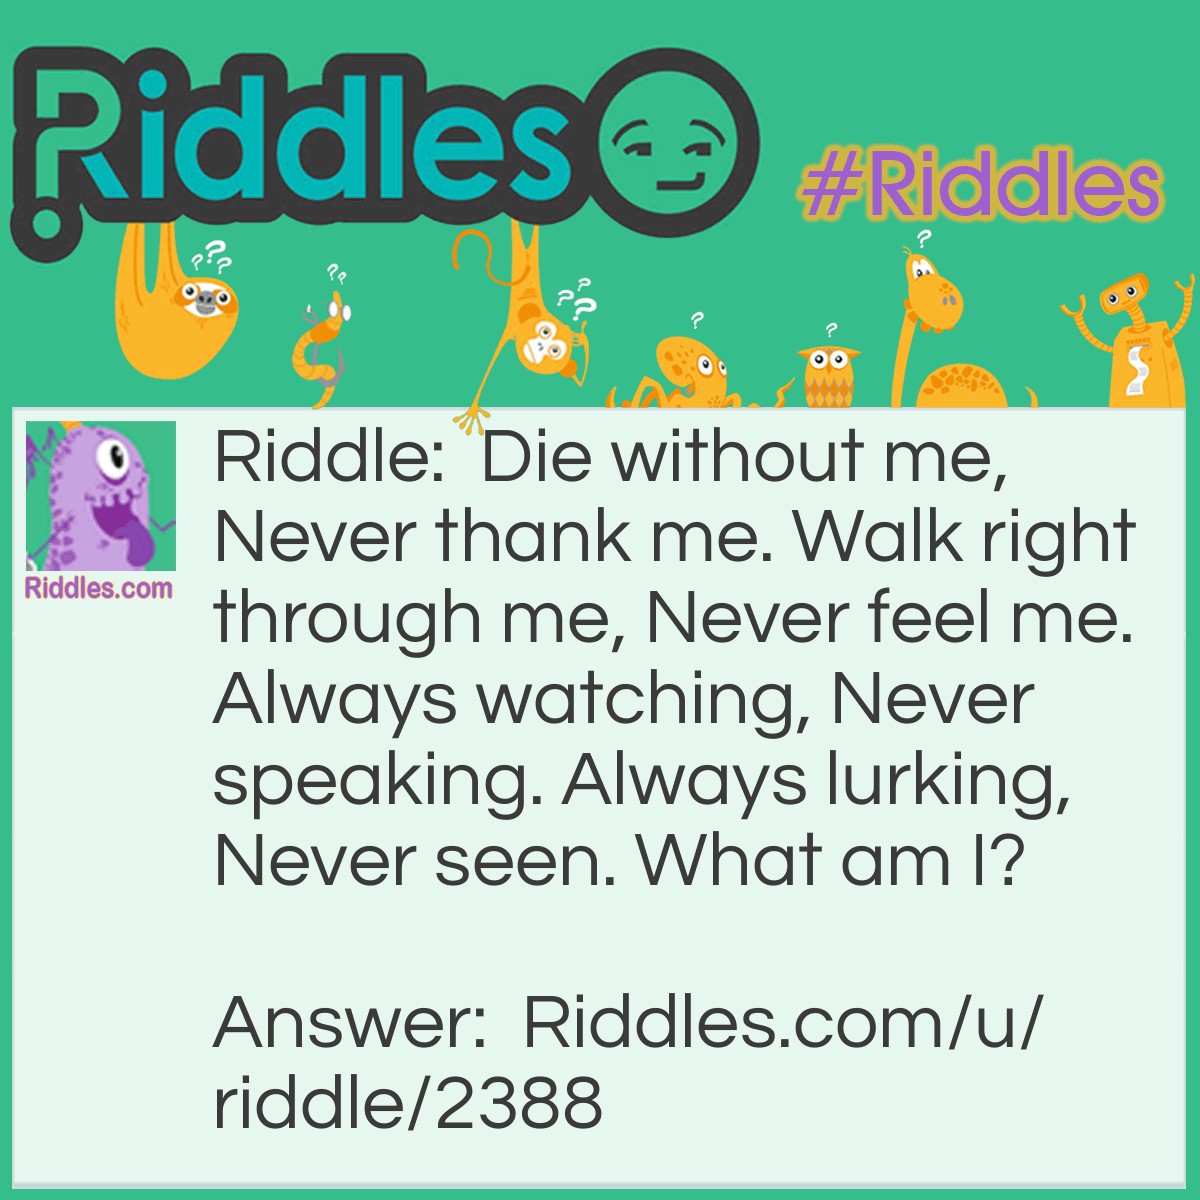 Riddle: Die without me, Never thank me. Walk right through me, Never feel me. Always watching, Never speaking. Always lurking, Never seen. What am I? Answer: Air.